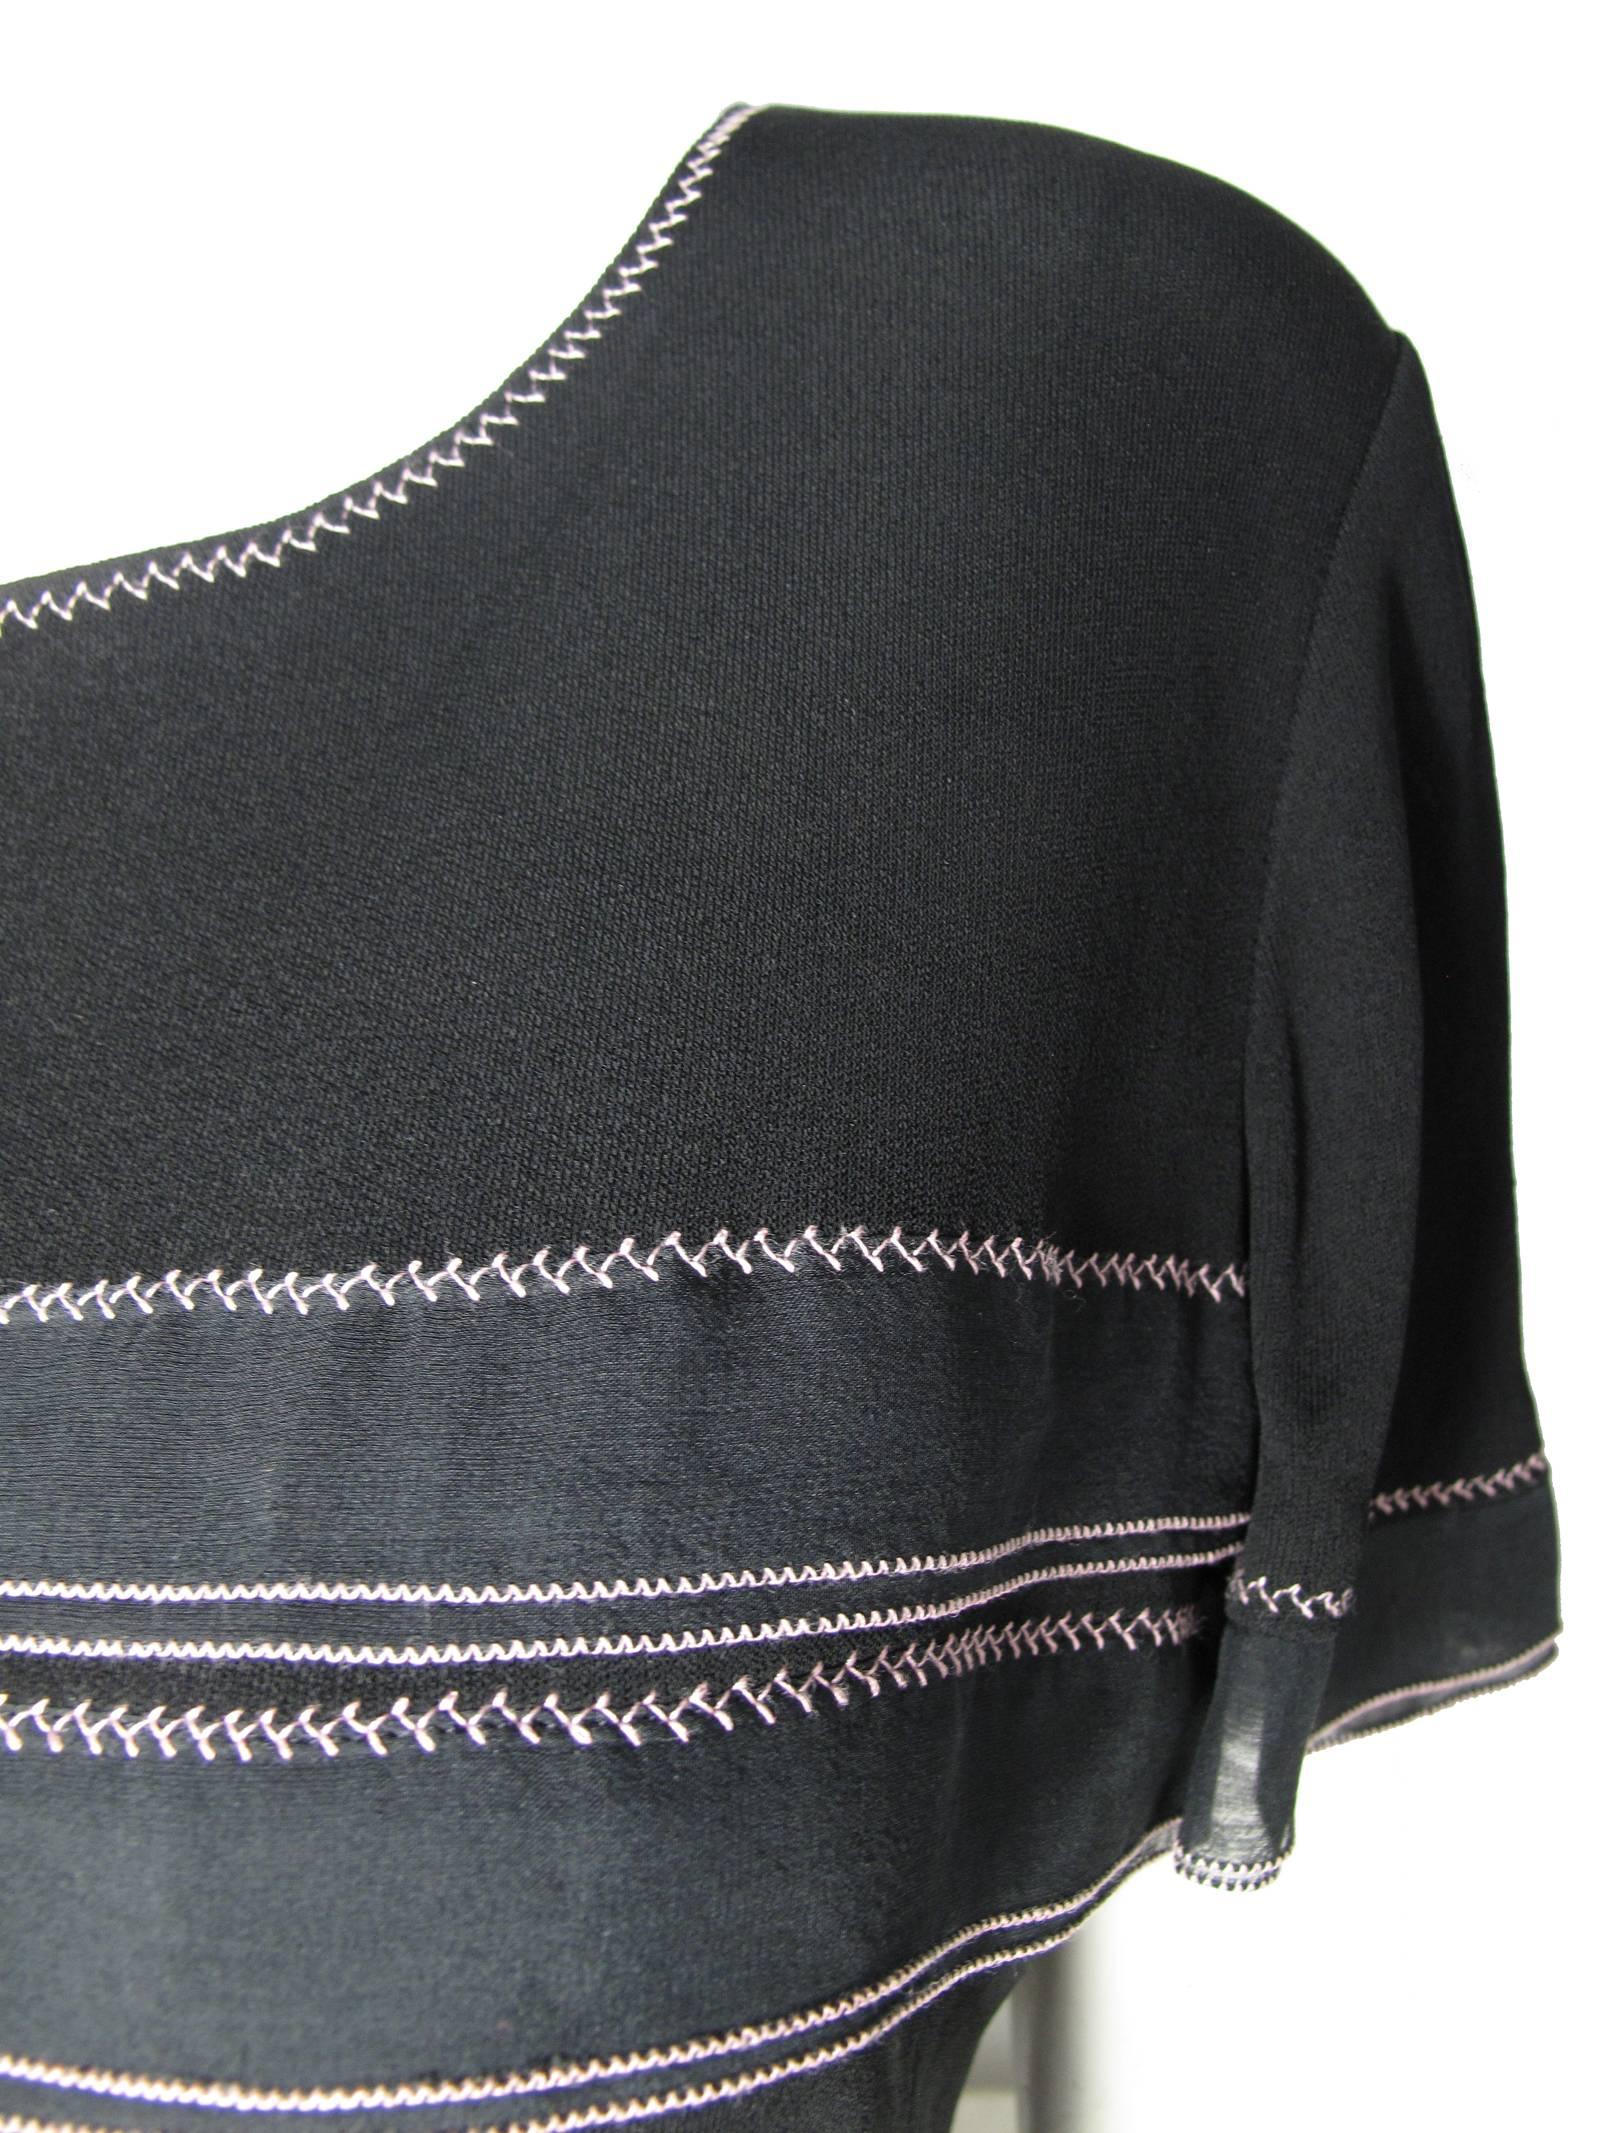 Chanel Black Skirt and Top with Pink Stitching and Ruffle Trim 1